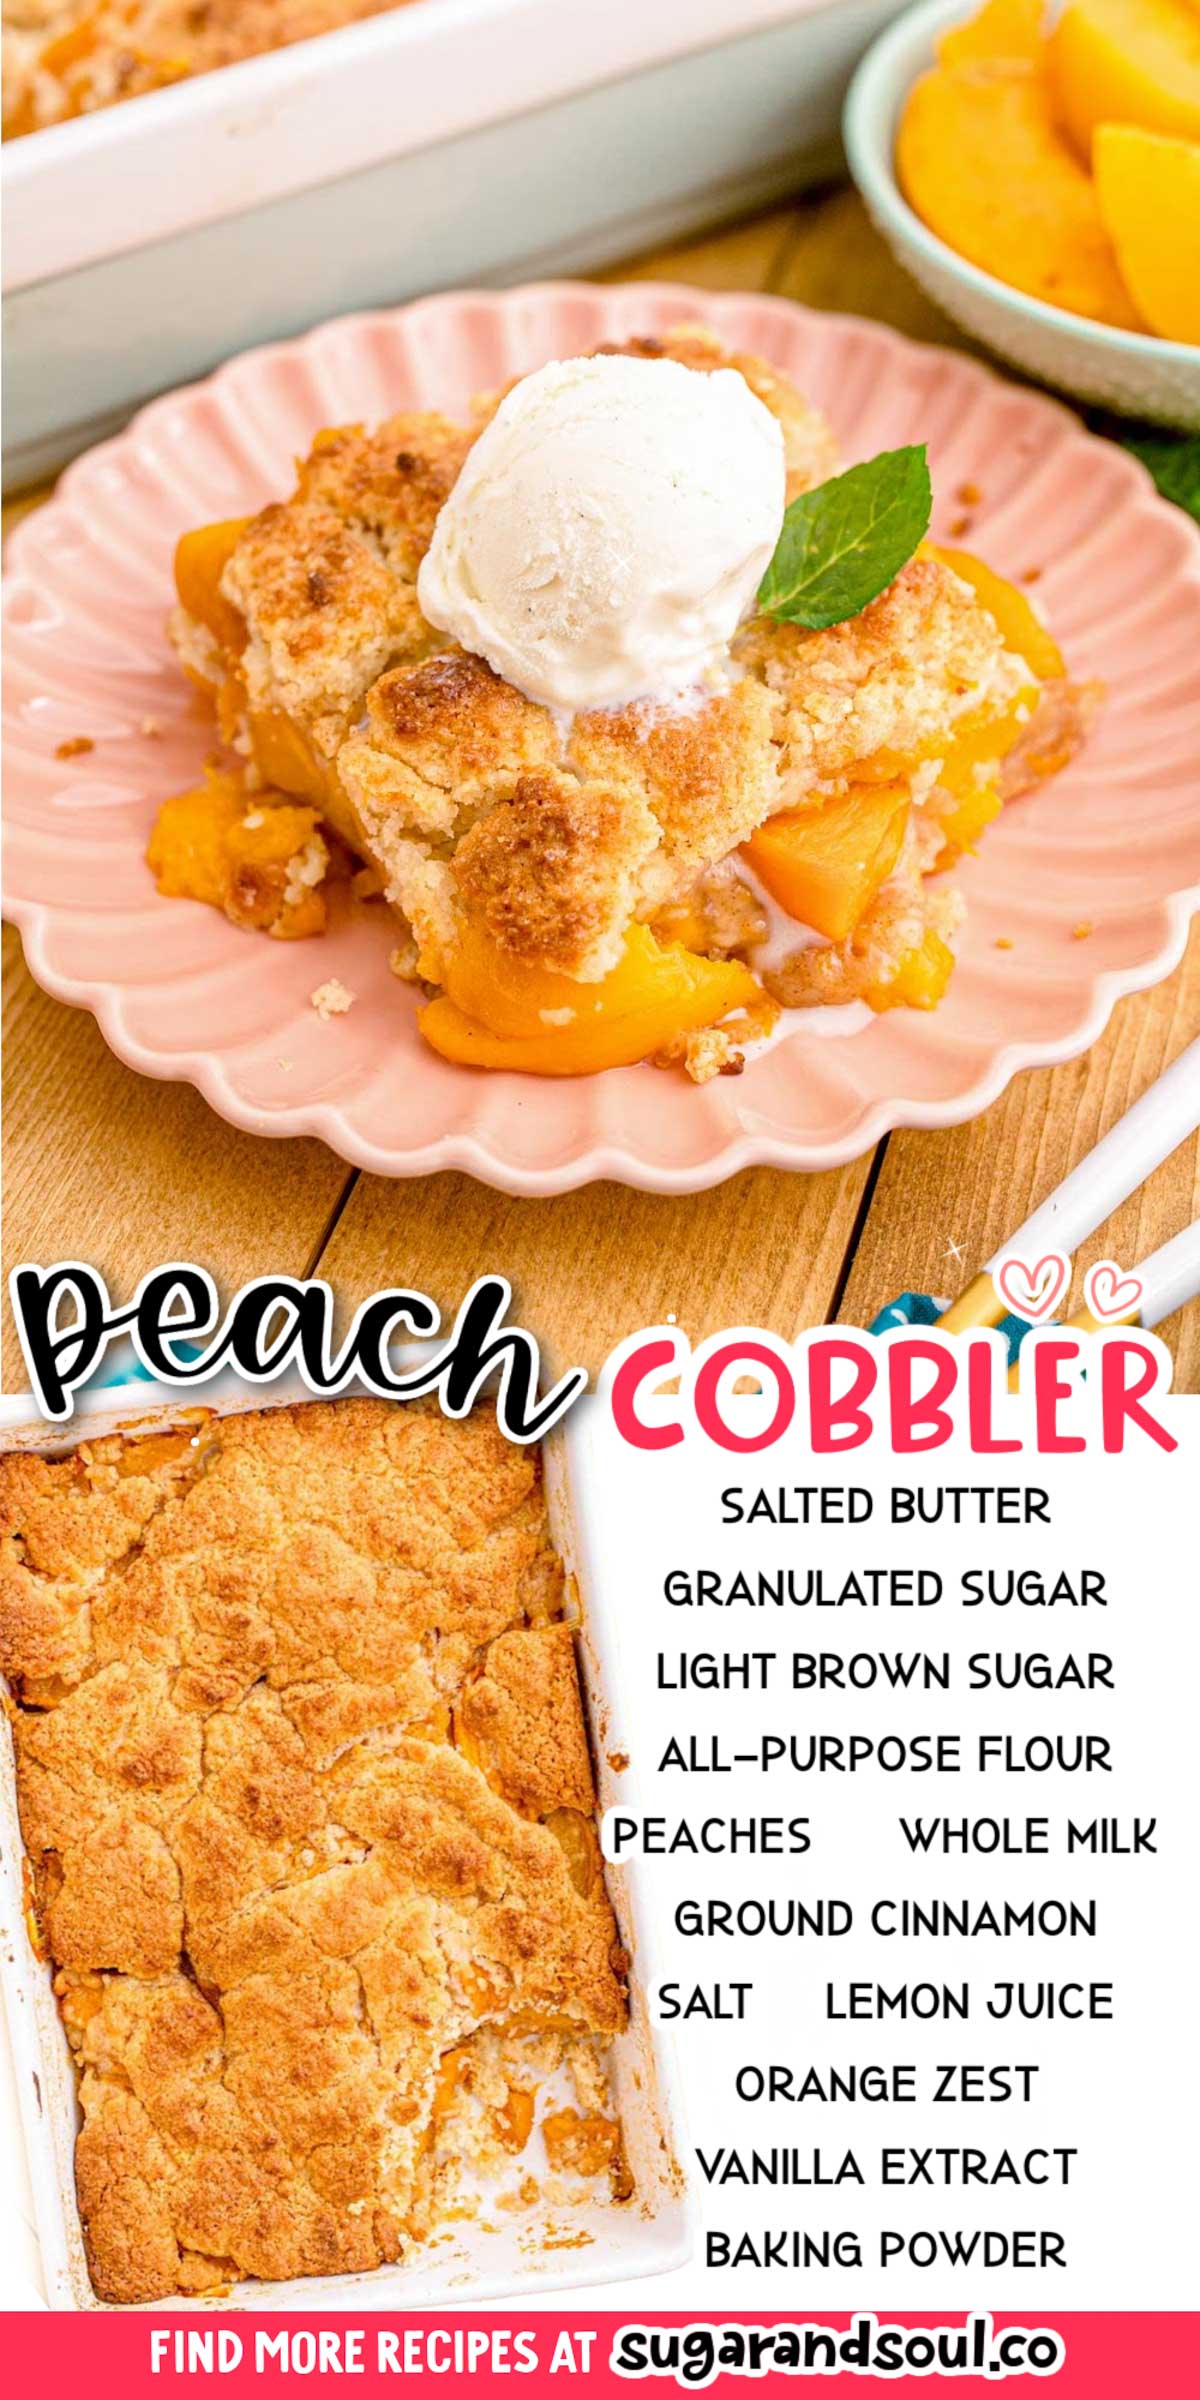 Southern Peach Cobbler has a sweet, fruity filling that's made with canned peaches and then covered with a delicious crumbly topping! An easy-to-make dessert that takes just 1 hour to bake! via @sugarandsoulco